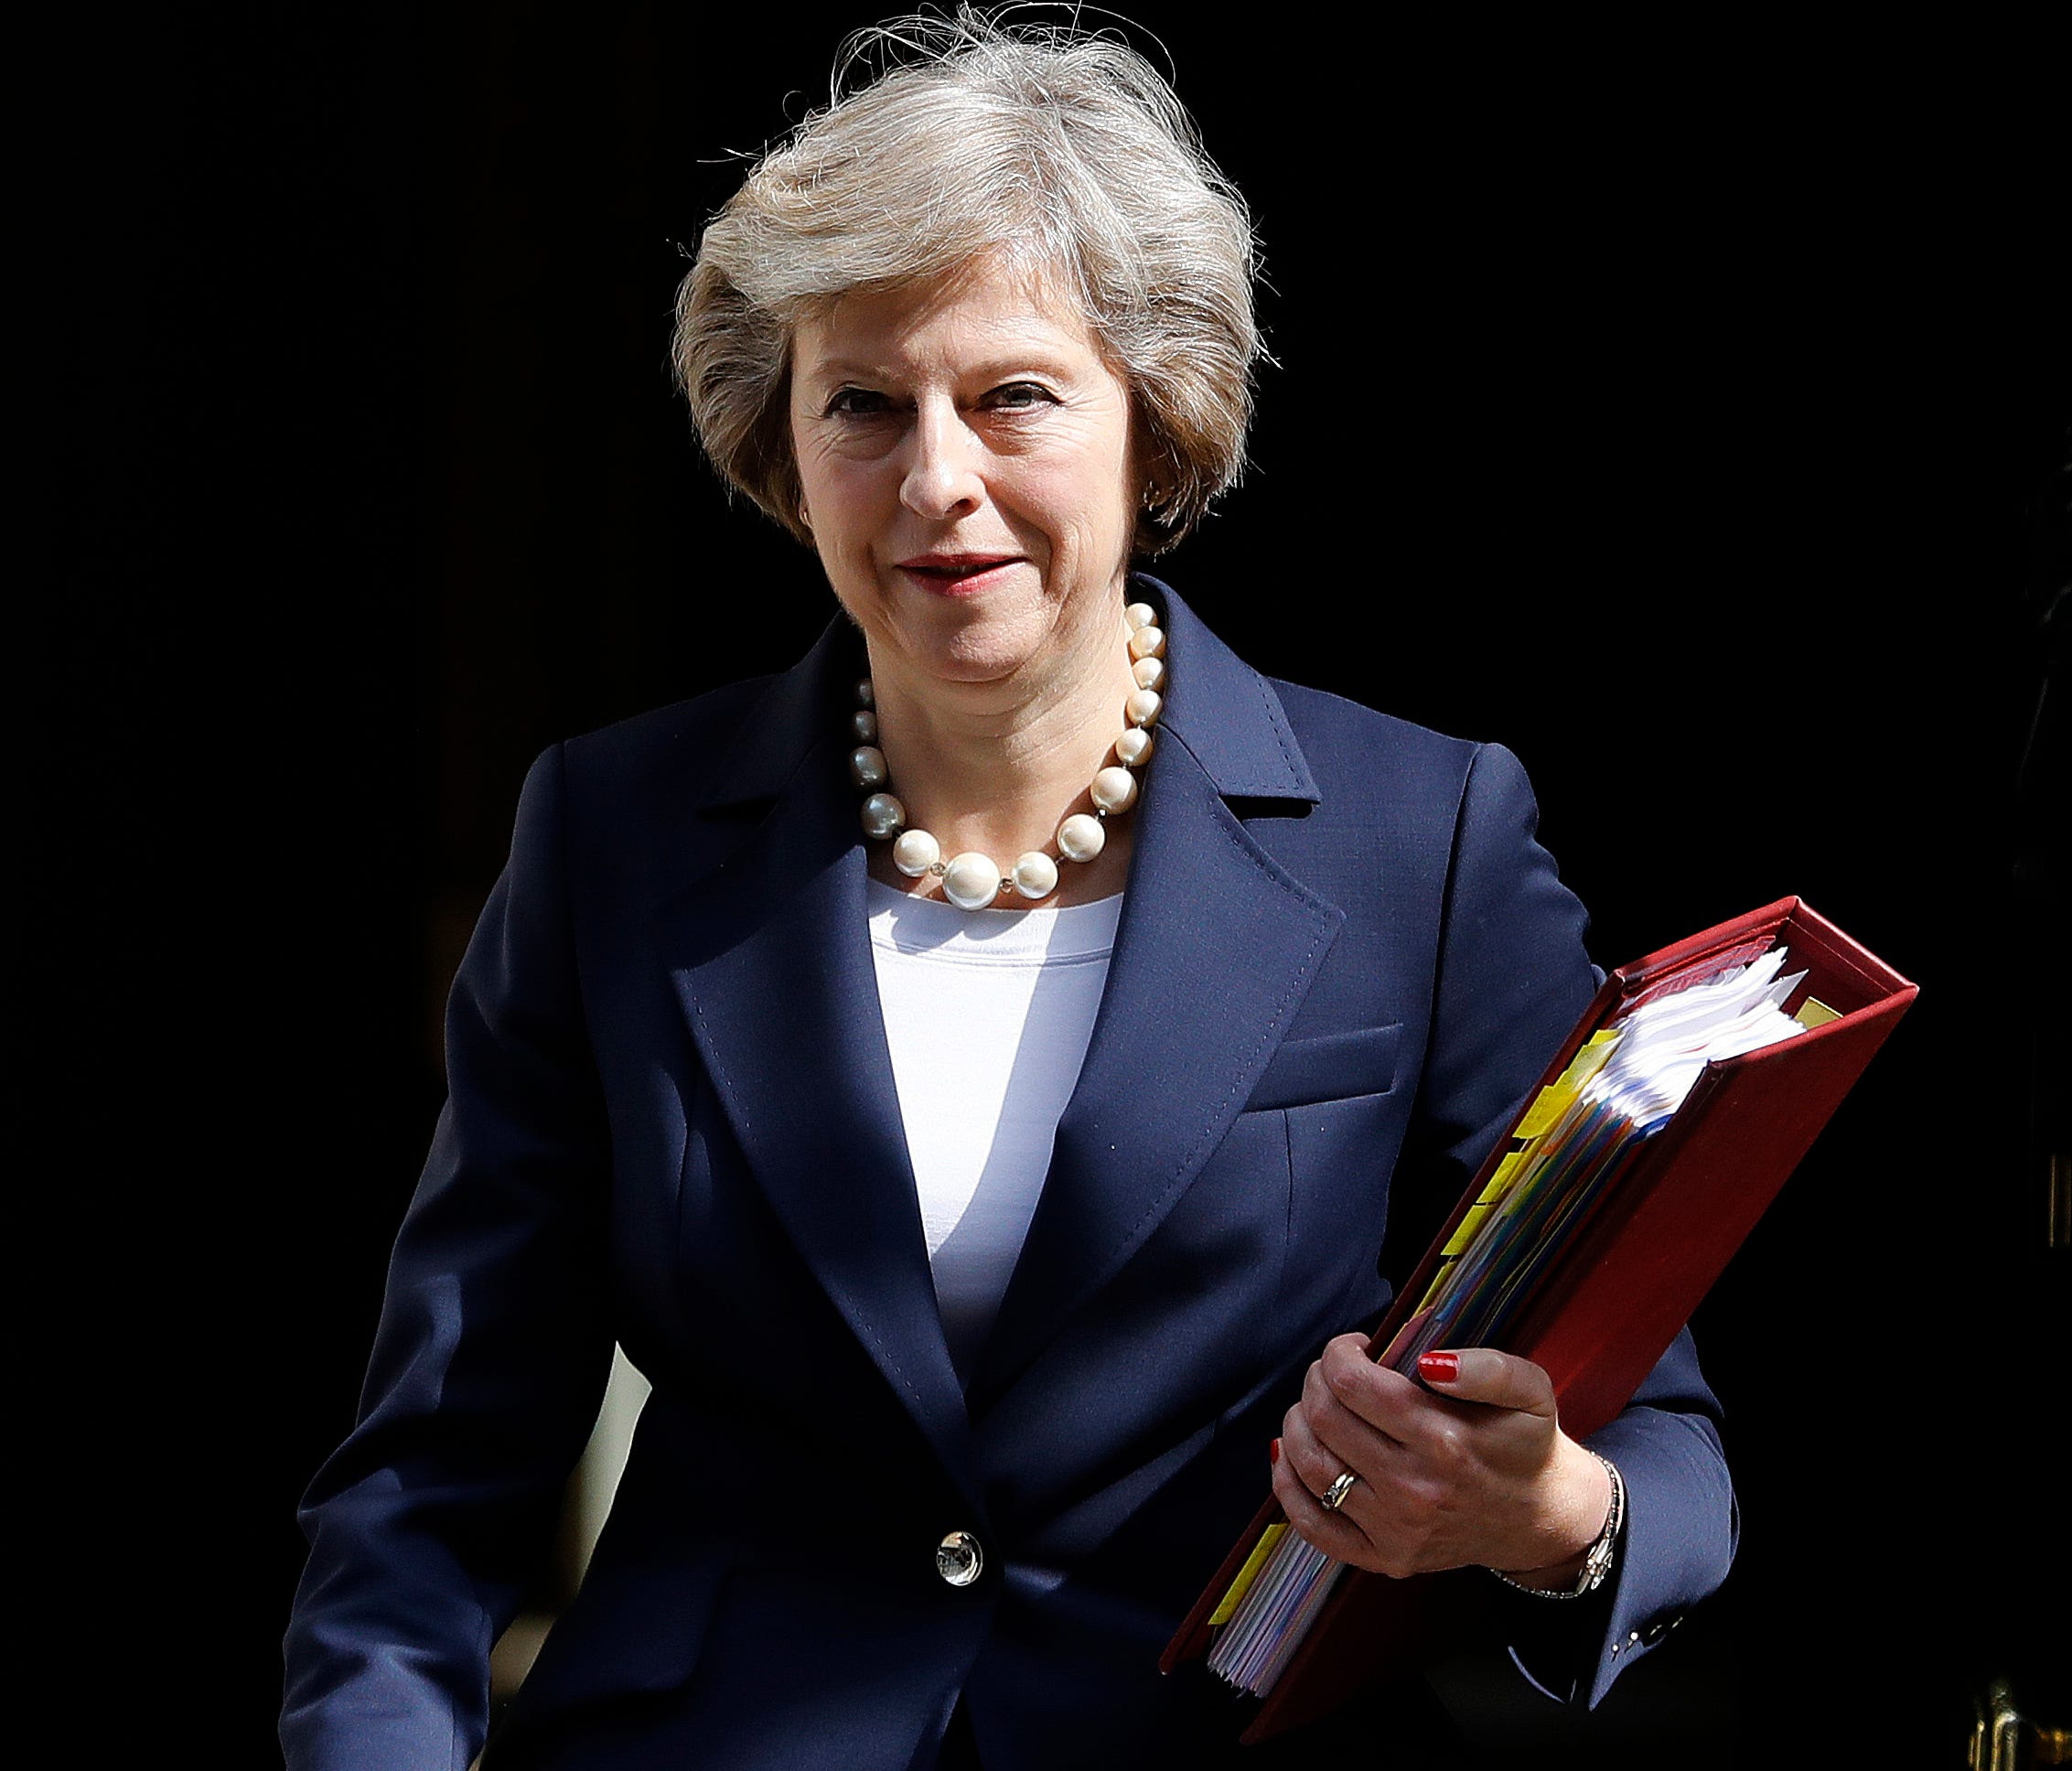 In this Wednesday, July 20, 2016 file photo, Britain's Prime Minister Theresa May leaves 10 Downing Street to attend her first Prime Minister's Questions at the House of Parliament in London.